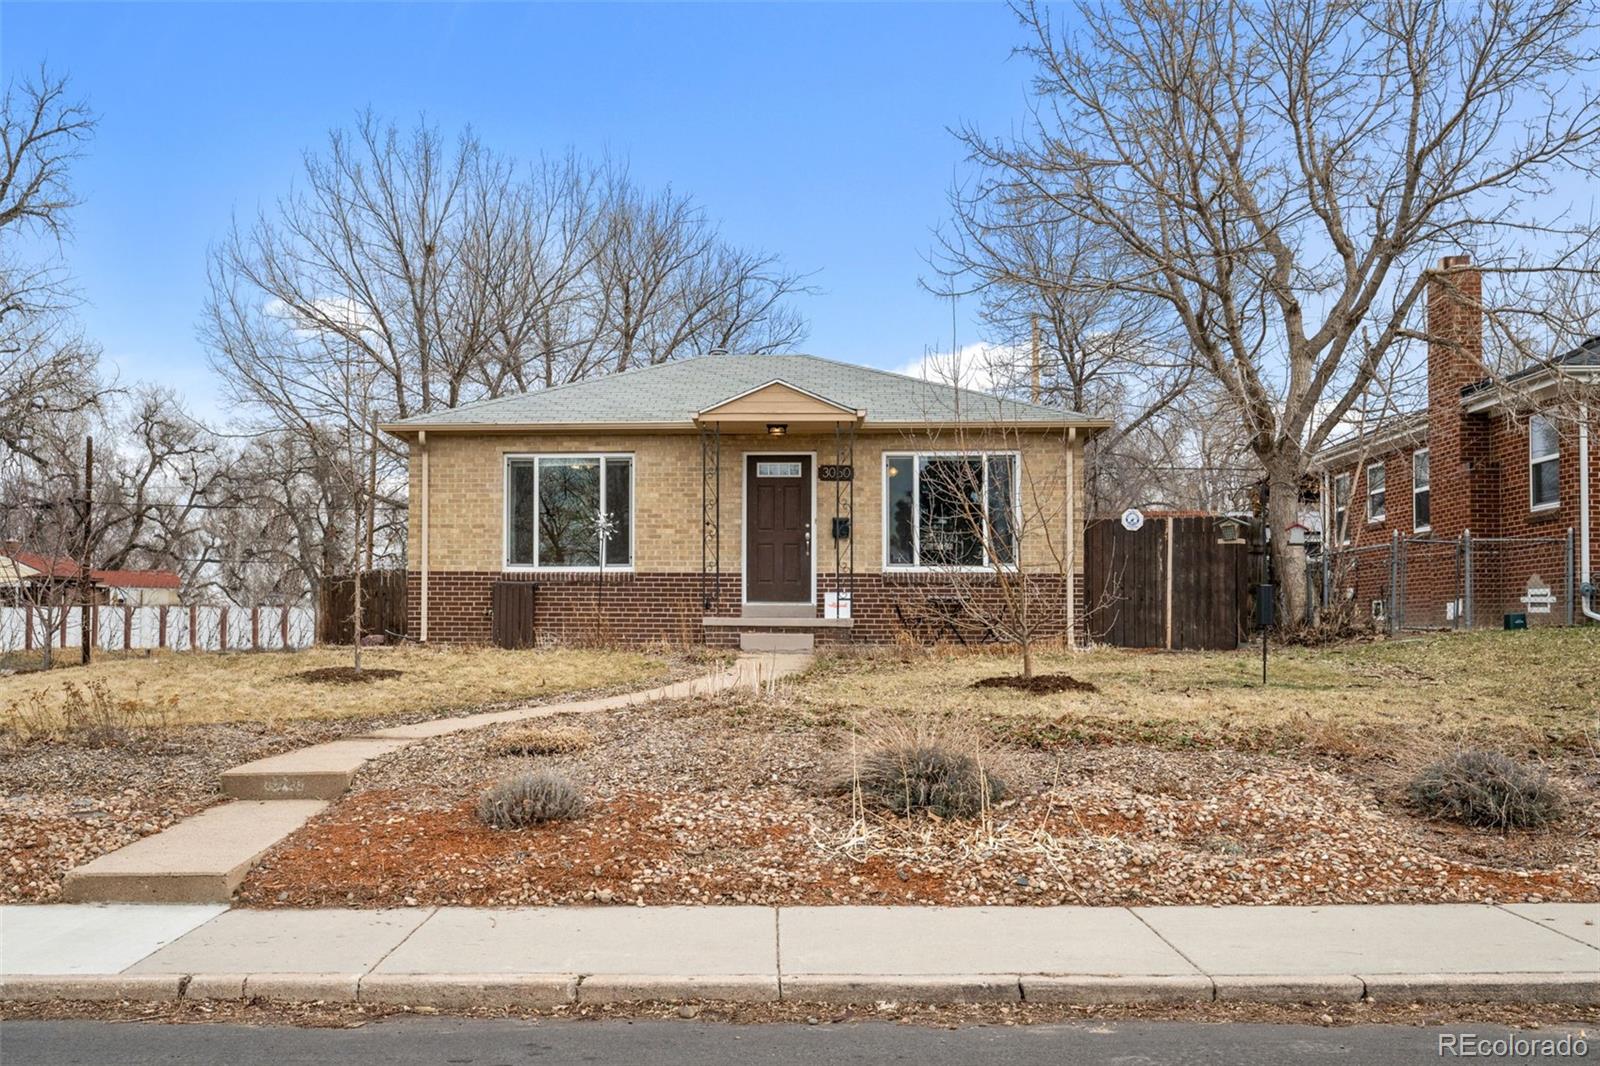 3060 n clayton street, denver sold home. Closed on 2024-04-29 for $611,062.